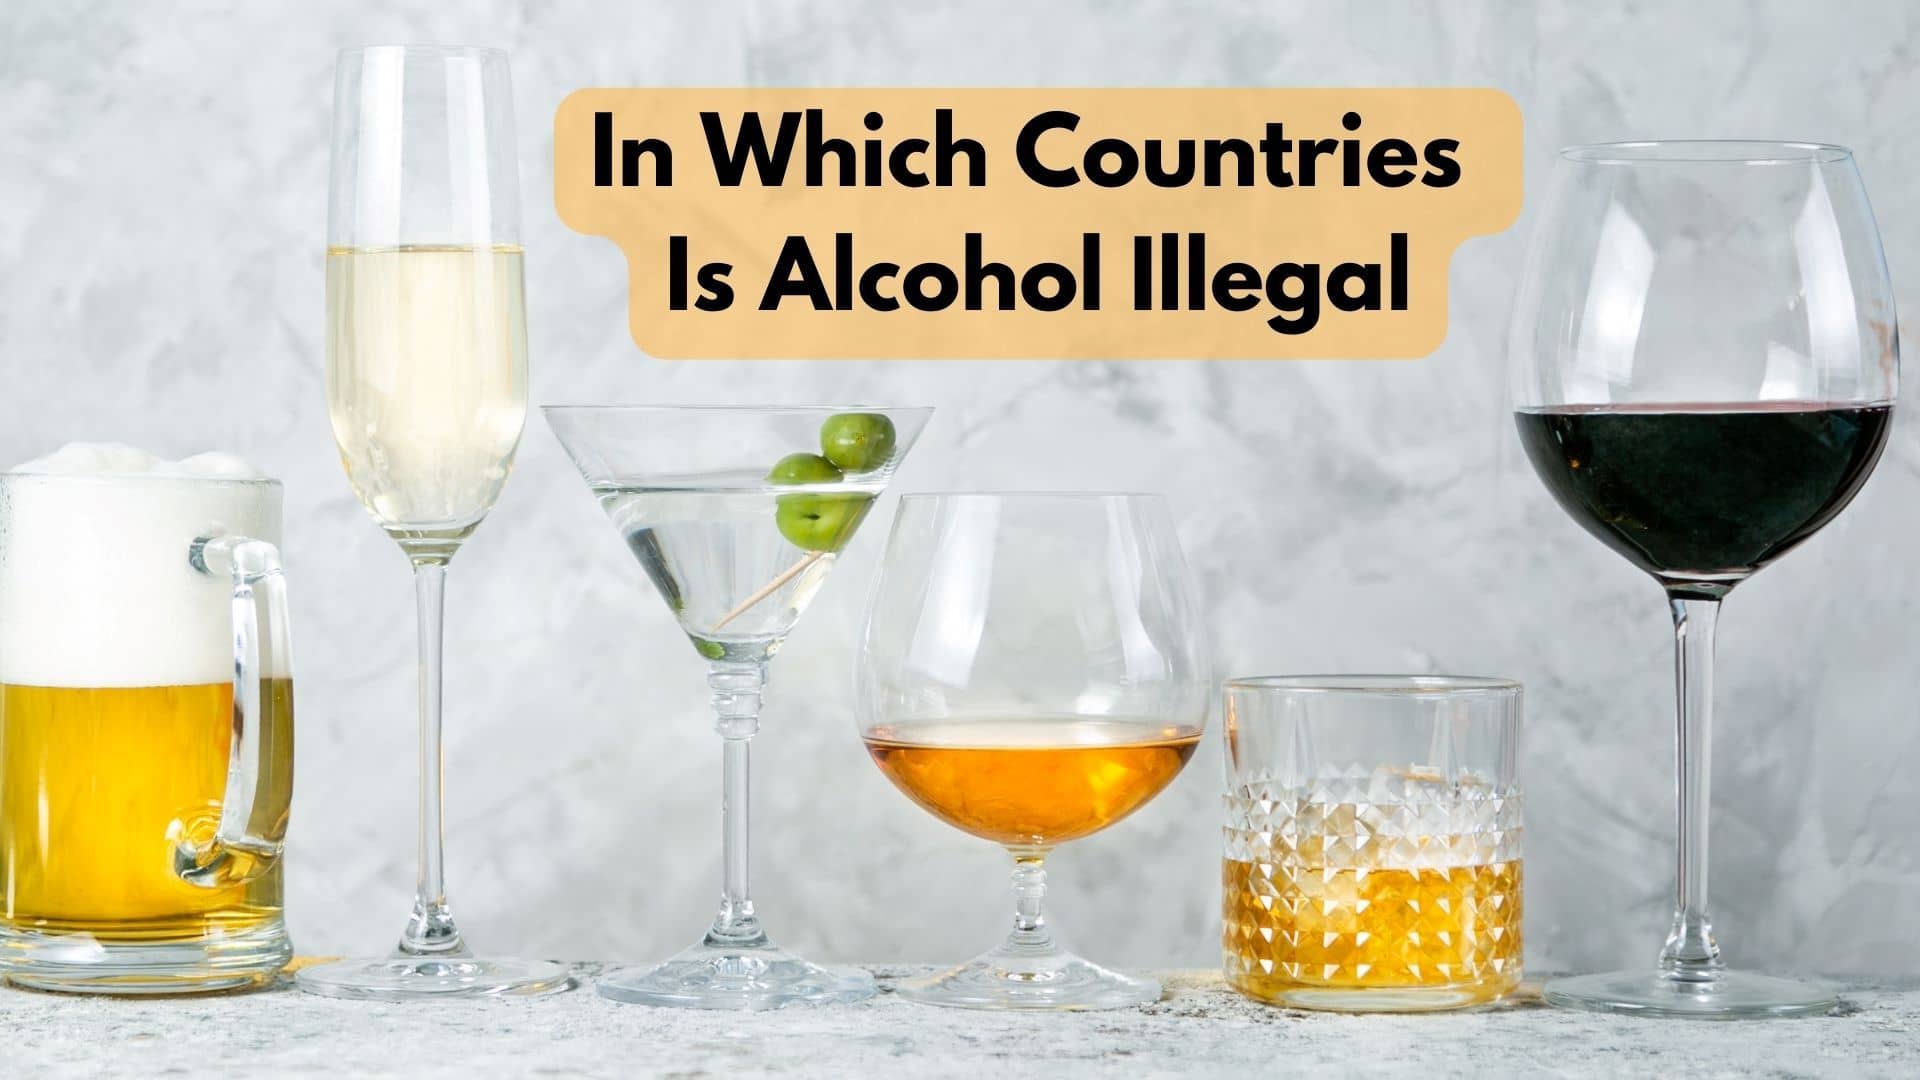 In Which Countries Is Alcohol Illegal